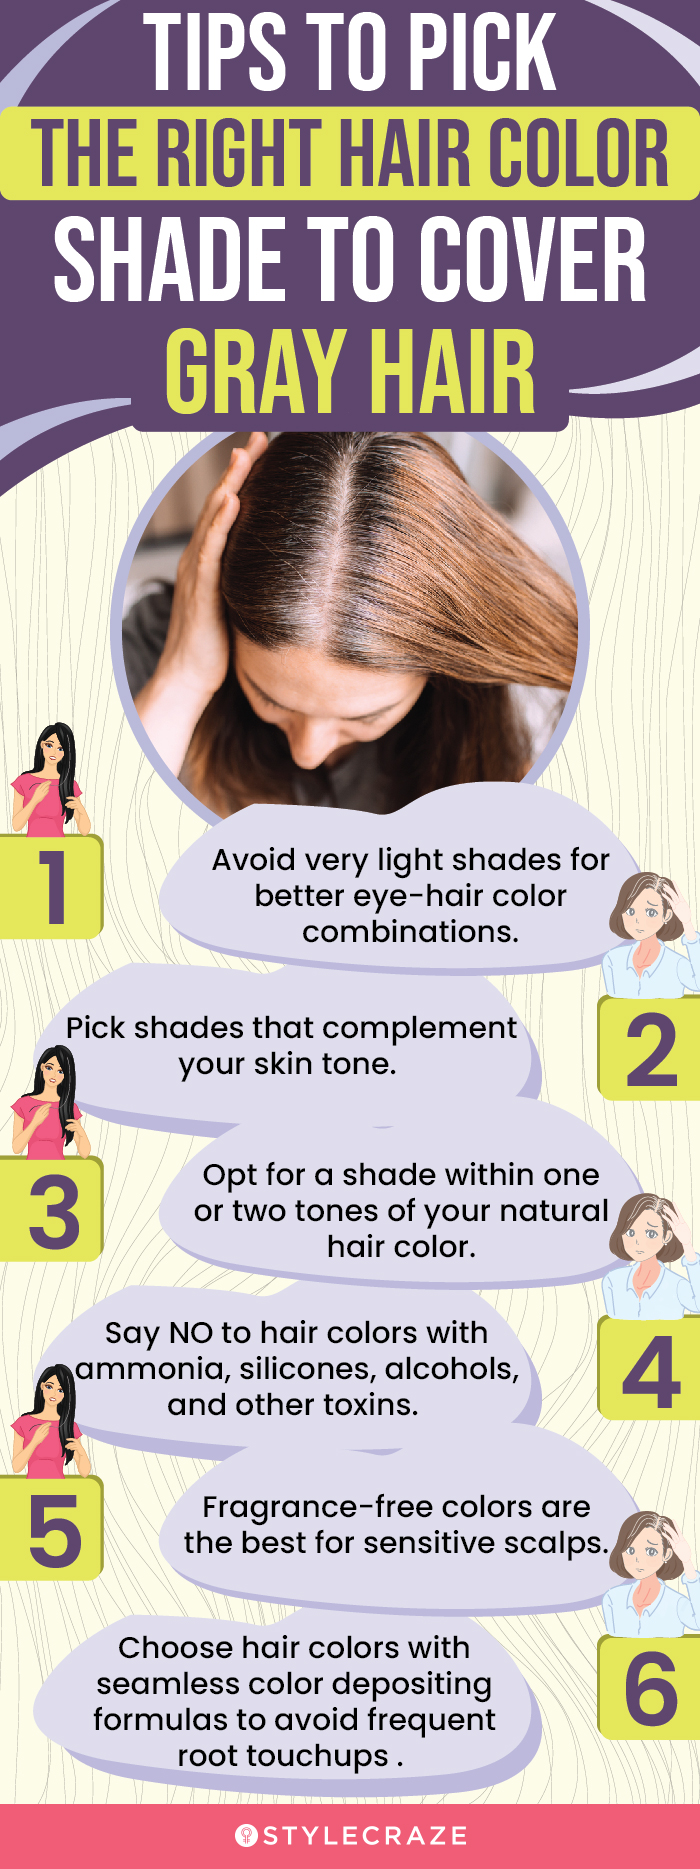 Tips To Pick The Right Hair Color Shade To Cover Gray Hair